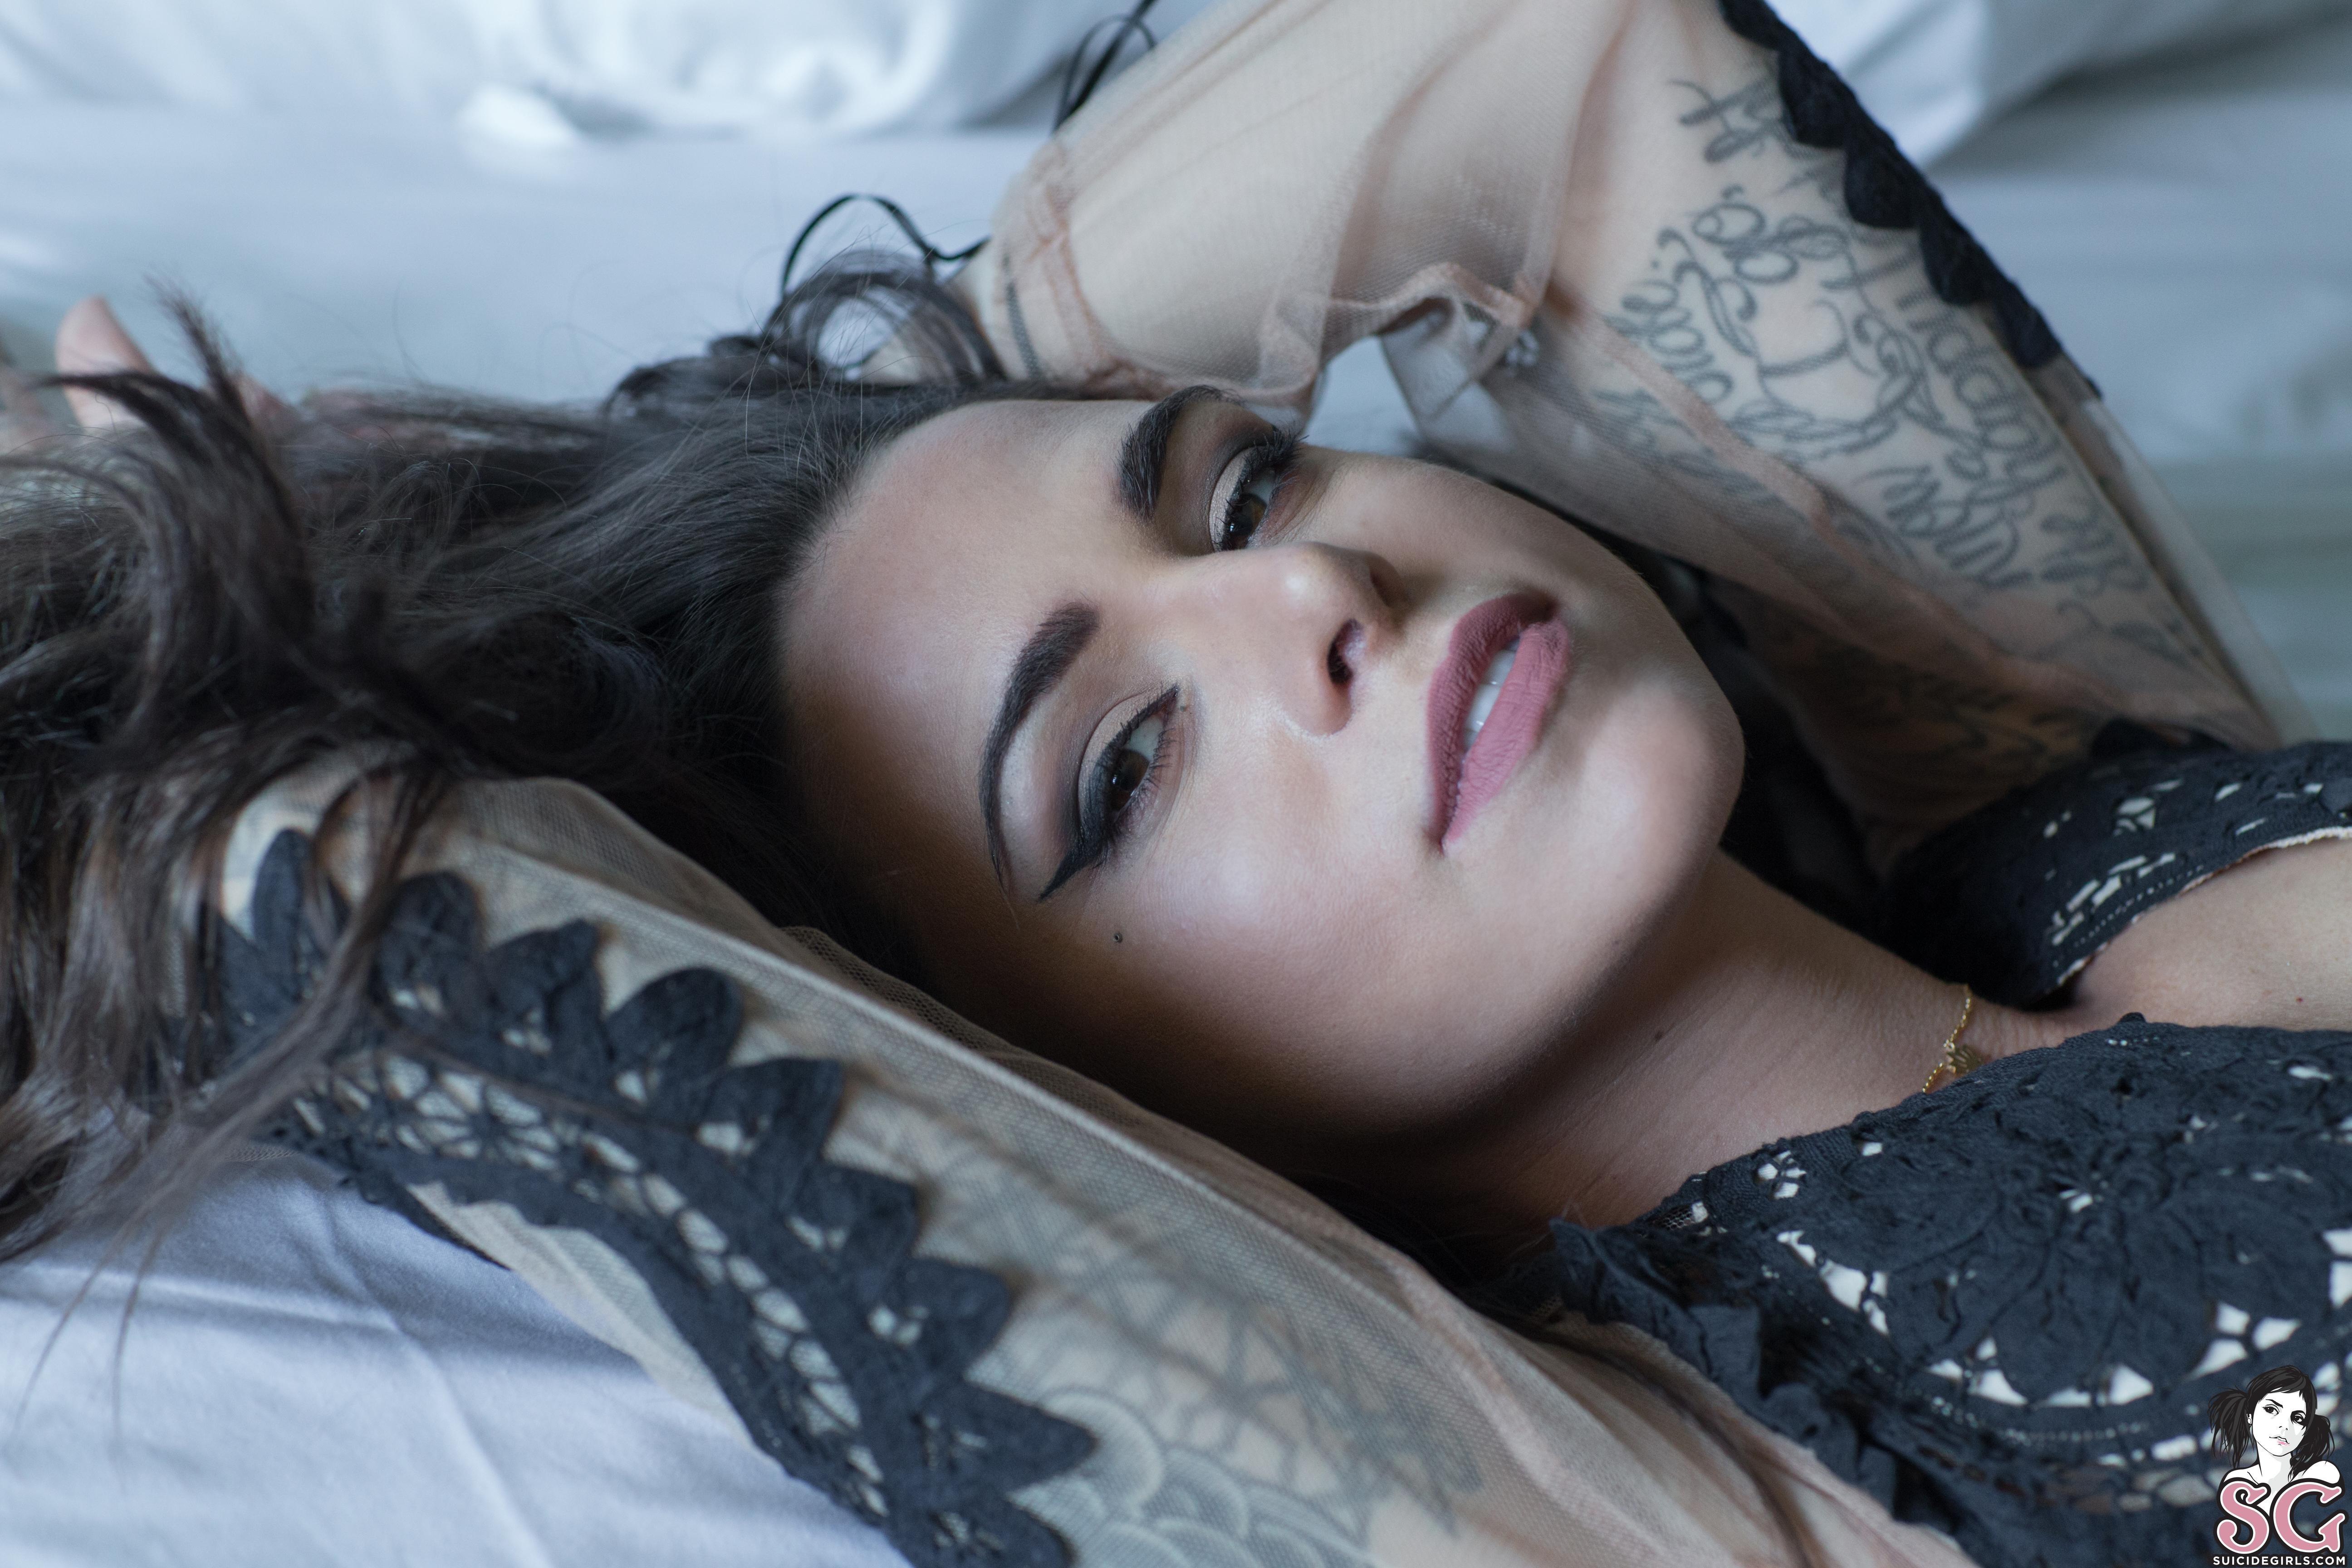 People 5184x3456 Suttin Suicide women model in bed face looking at viewer tattoo Suicide Girls brunette women indoors closeup watermarked